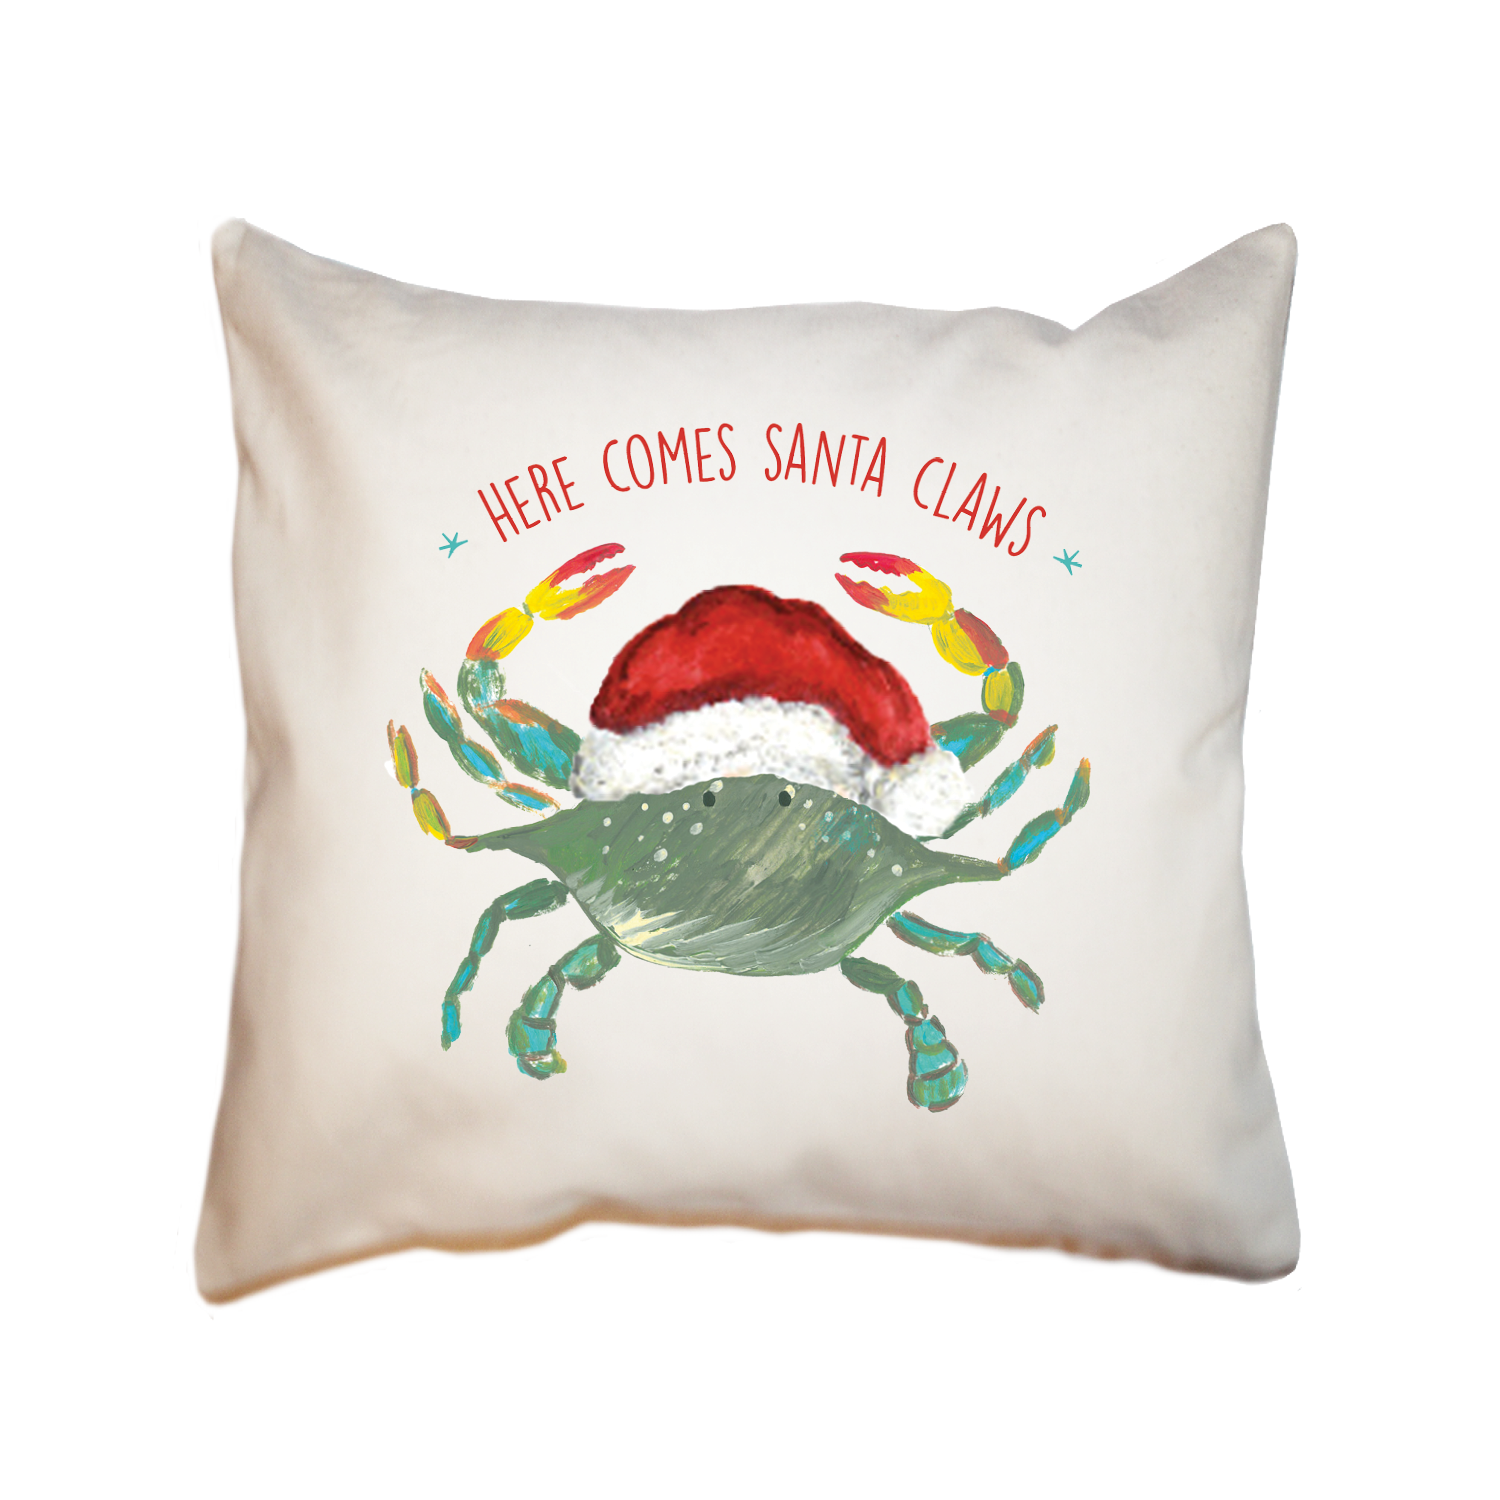 here comes santa claws square pillow